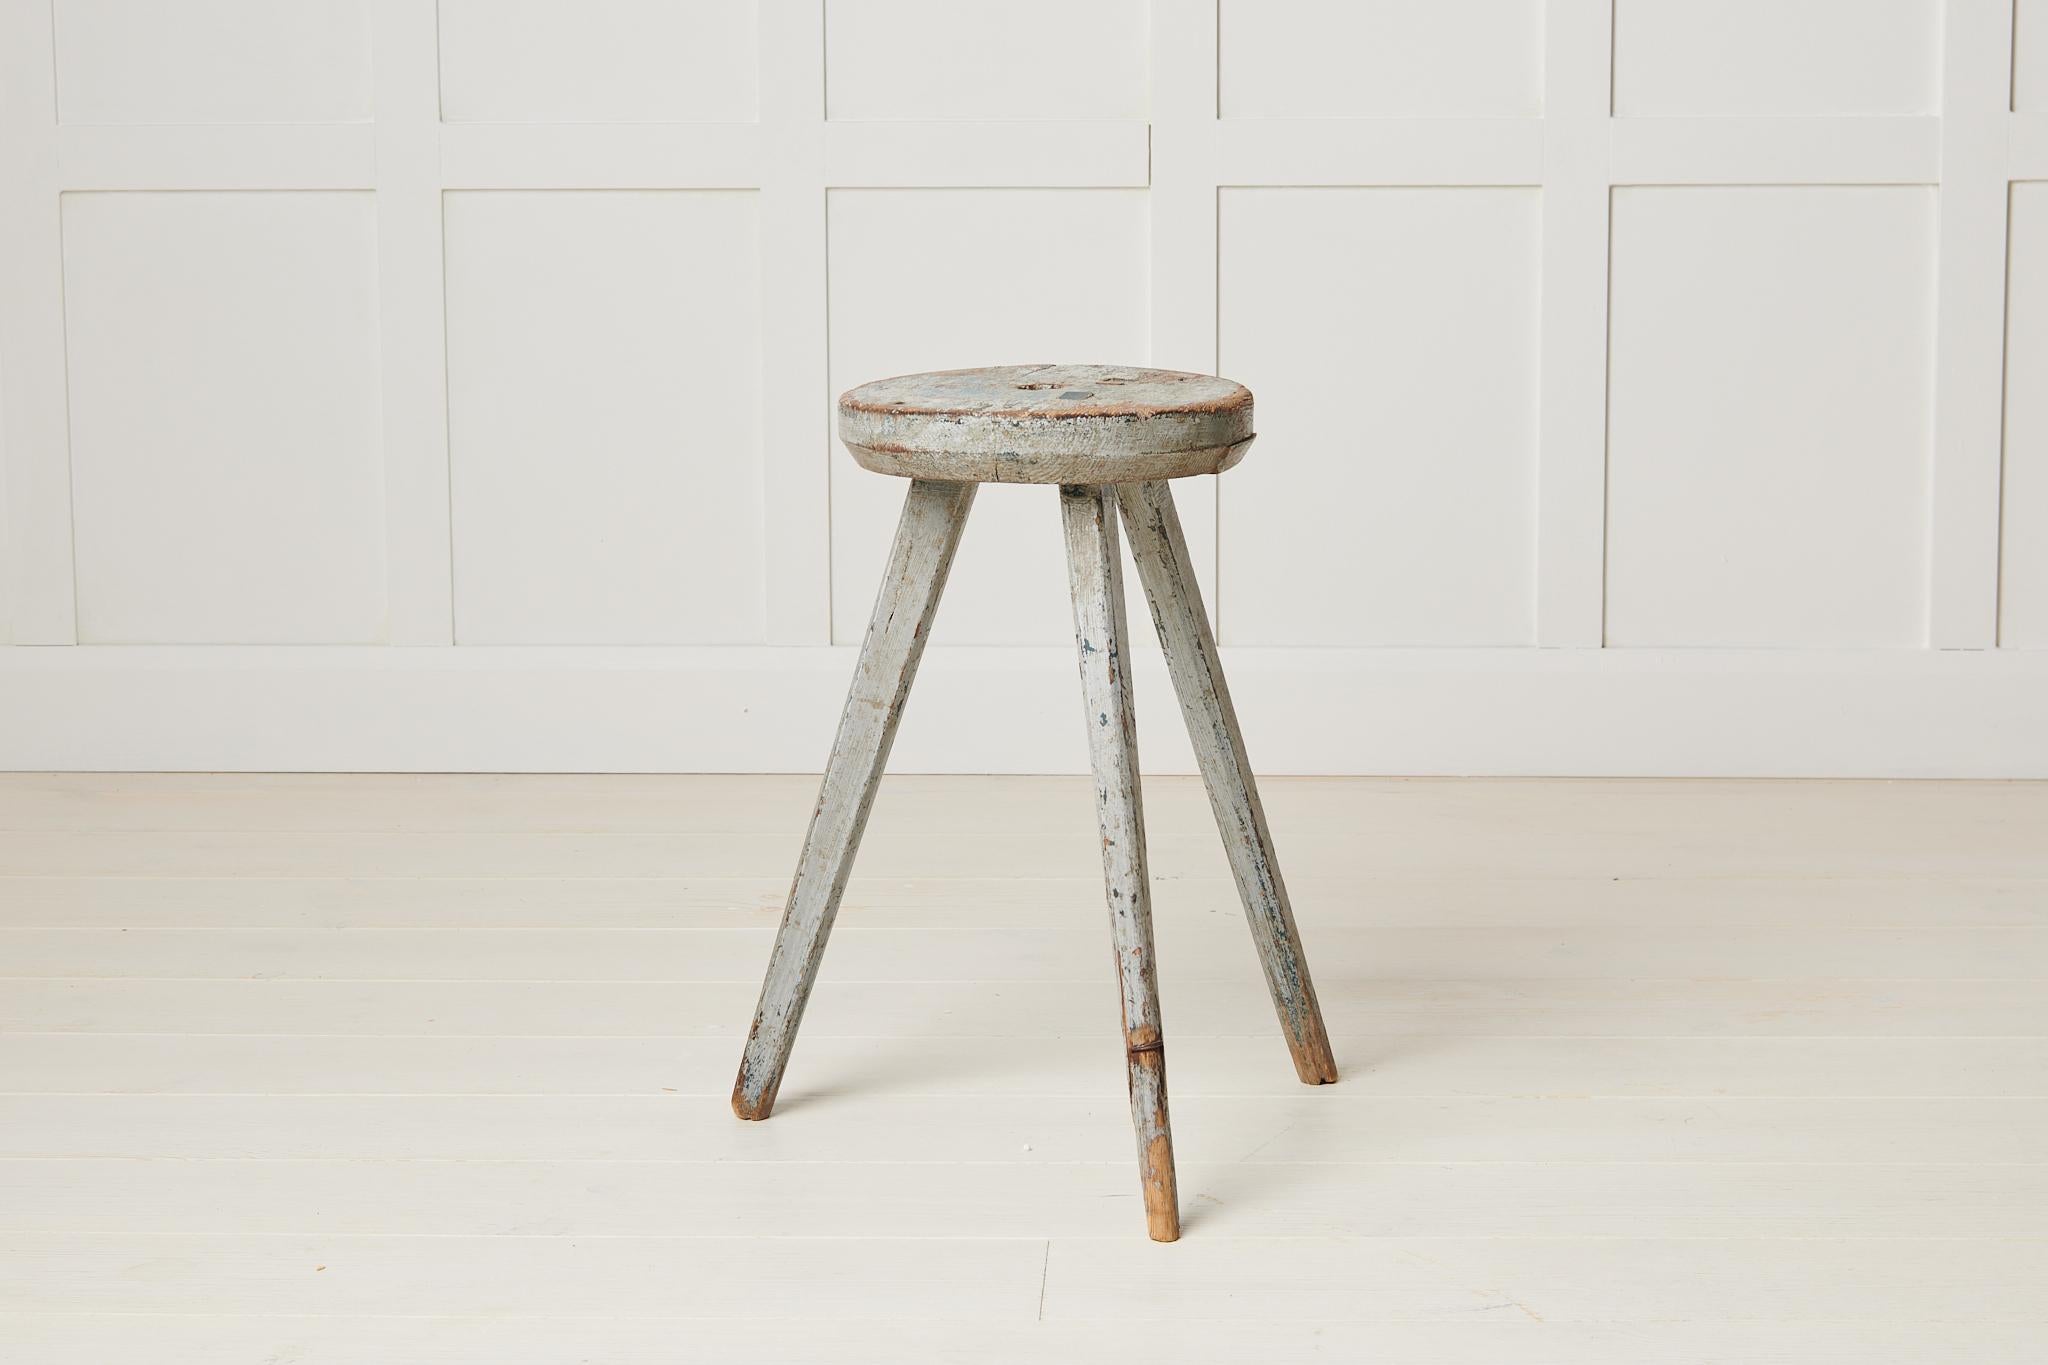 Antique Swedish rustic stool in folk art made with three legs. The stool has a round seat and is in its untouched original condition. The paint has become distressed with time and the resulting patina is full of rustic charm and character. This